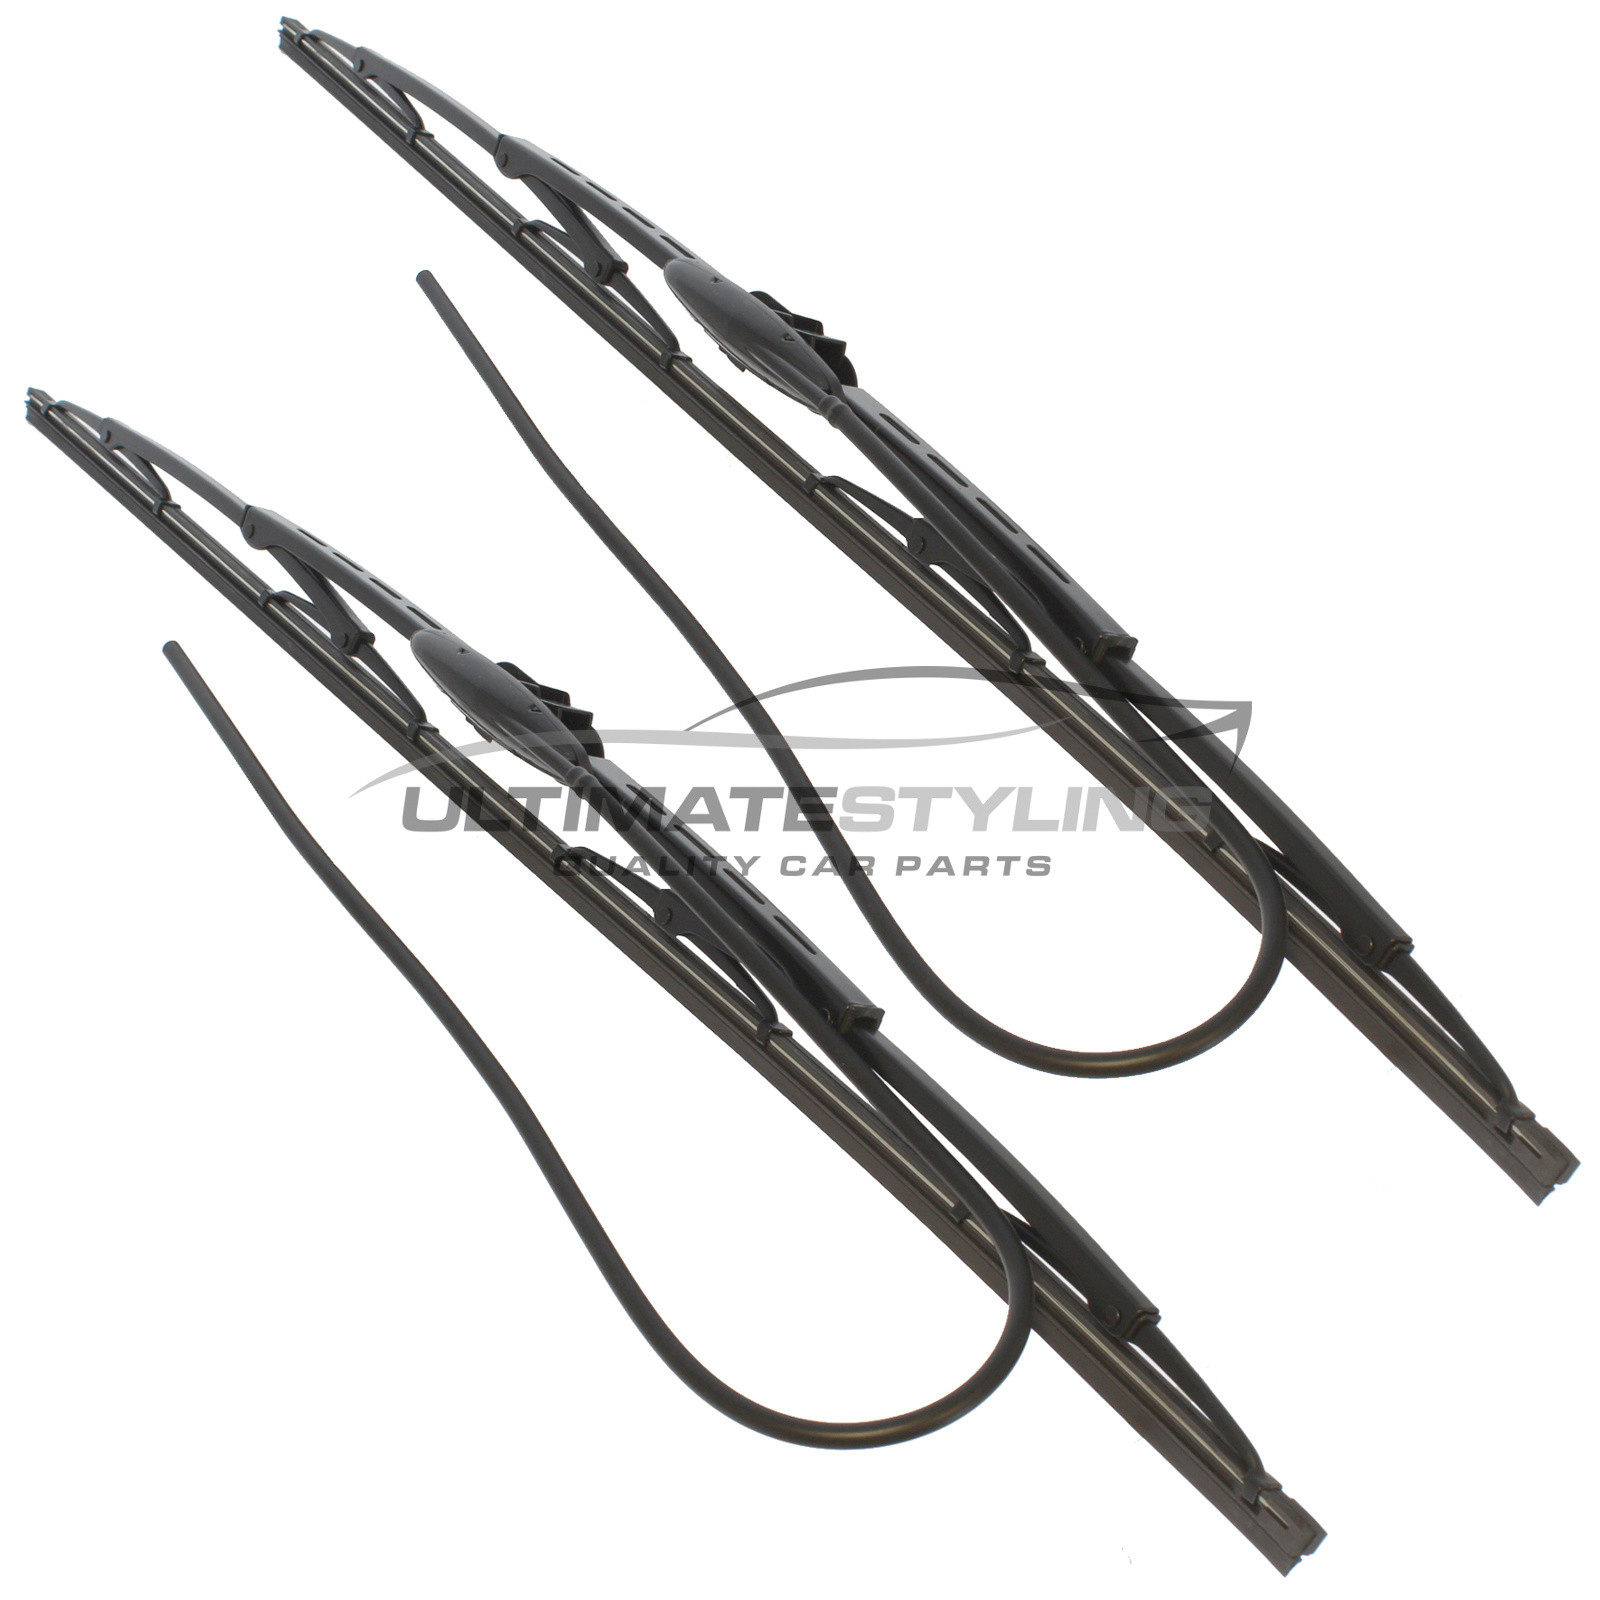 Drivers Side & Passenger Side (Front) Wiper Blades & Washer Kits for Iveco Daily